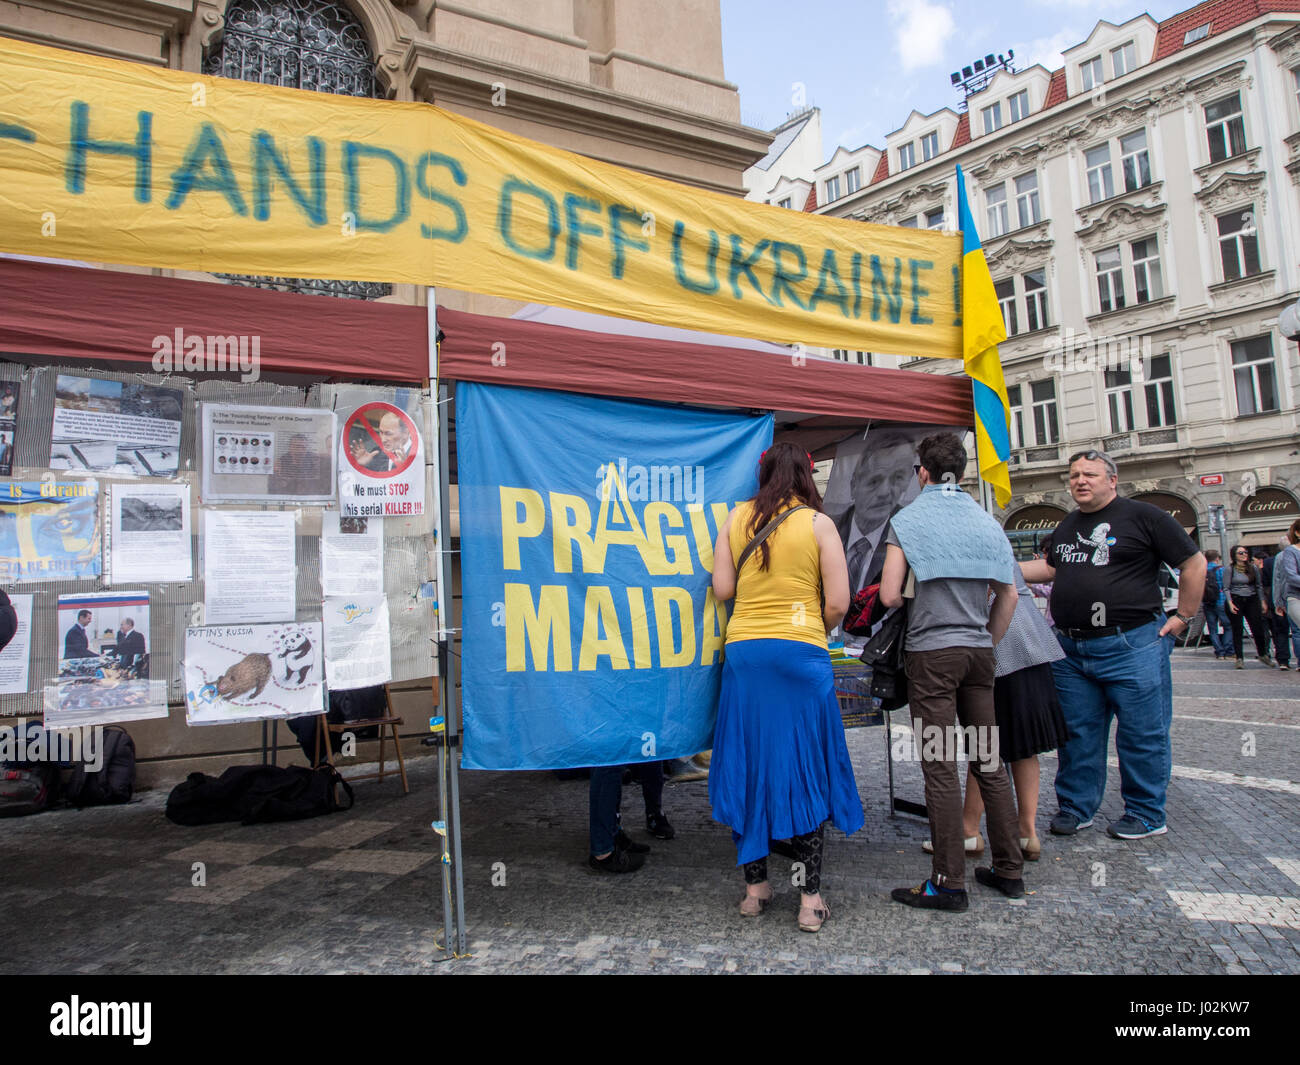 Prague, Czech Republic. 9th April, 2017. Prague Maidan part of the Ukrainian Volunteer Network were taking advantage of the warm weather today and out on the streets of the capitol collecting for humanitarian help back in the Ukraine. And campaigning to bring pressure to stop President Putin from attacks. Credit: Veteran Photography/Alamy Live News Stock Photo